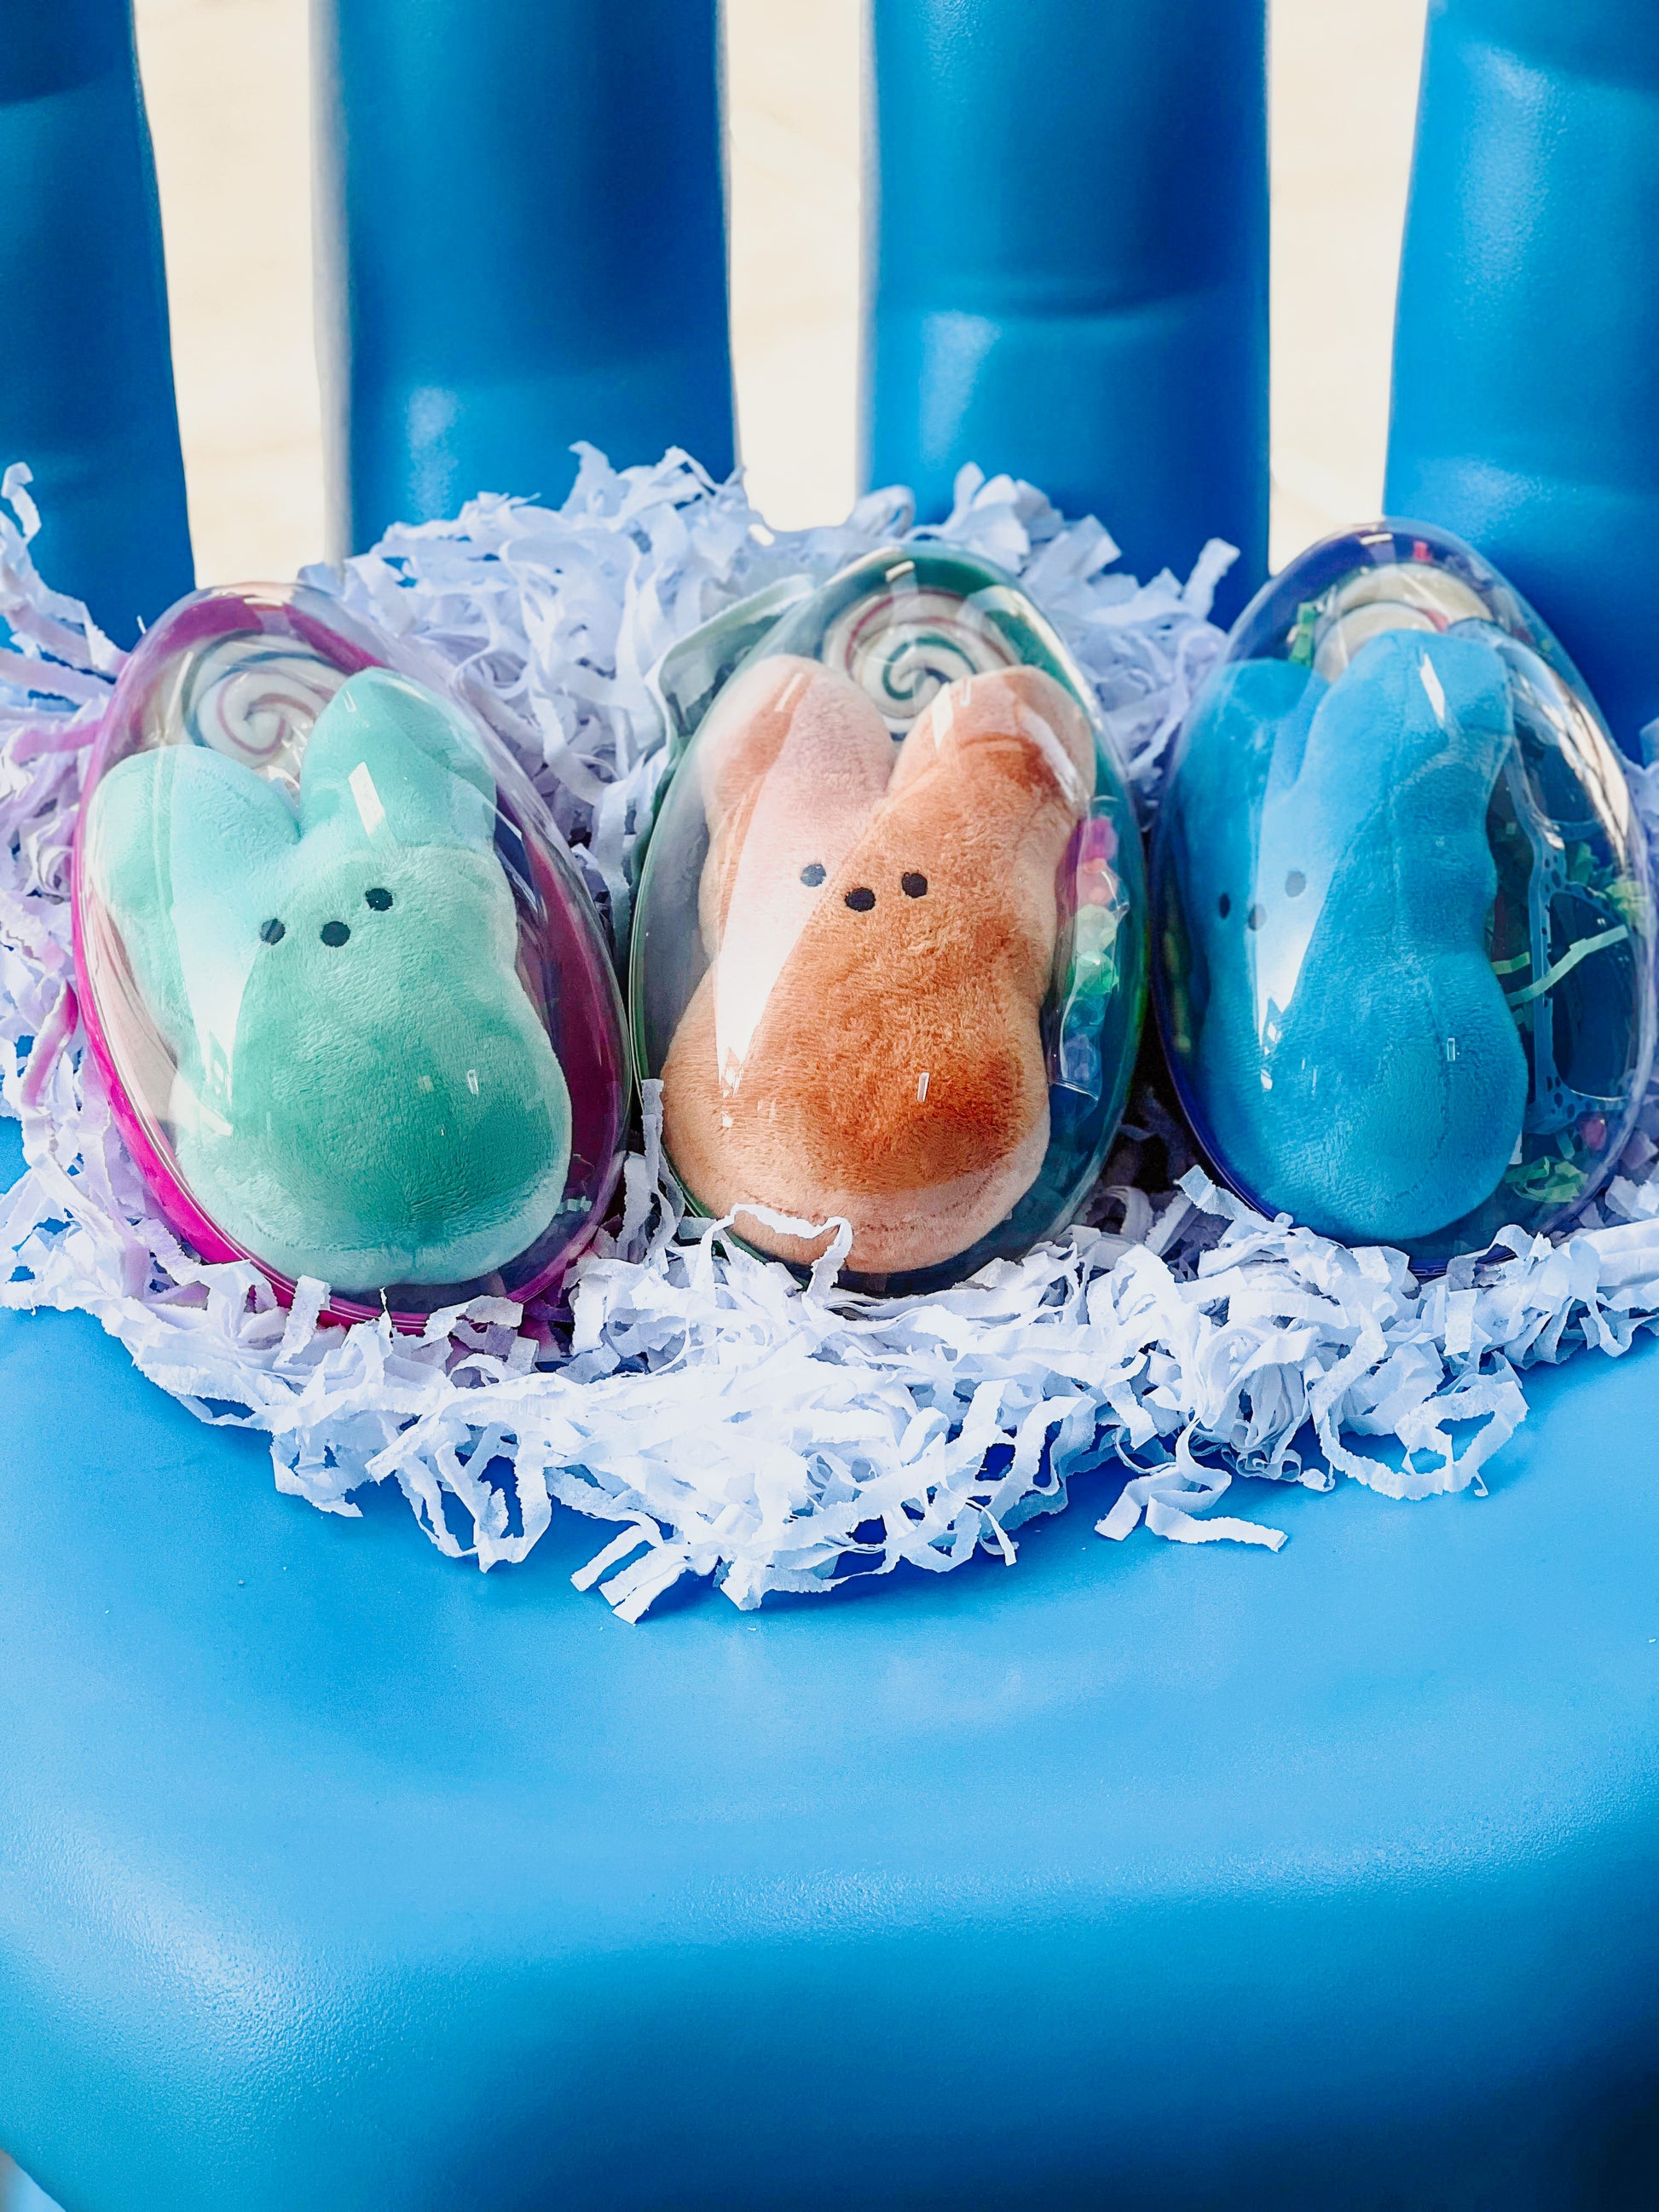 Easter Egg Sets! Tea for Three: A Children's Boutique